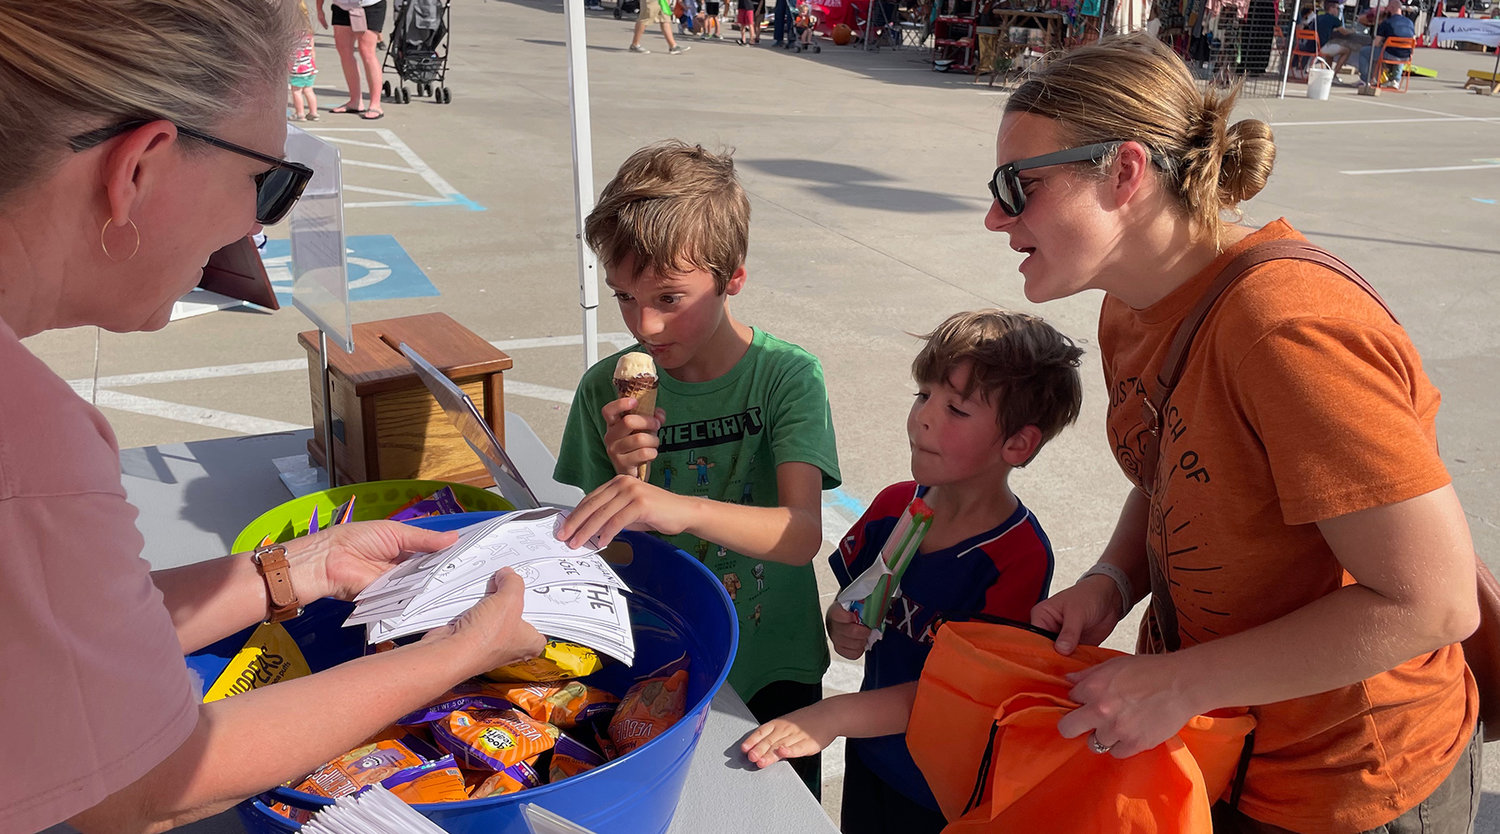 Caden and Damen Witt pick out bookmarks at the East Parker County Library booth with Megam Witt, their mom.